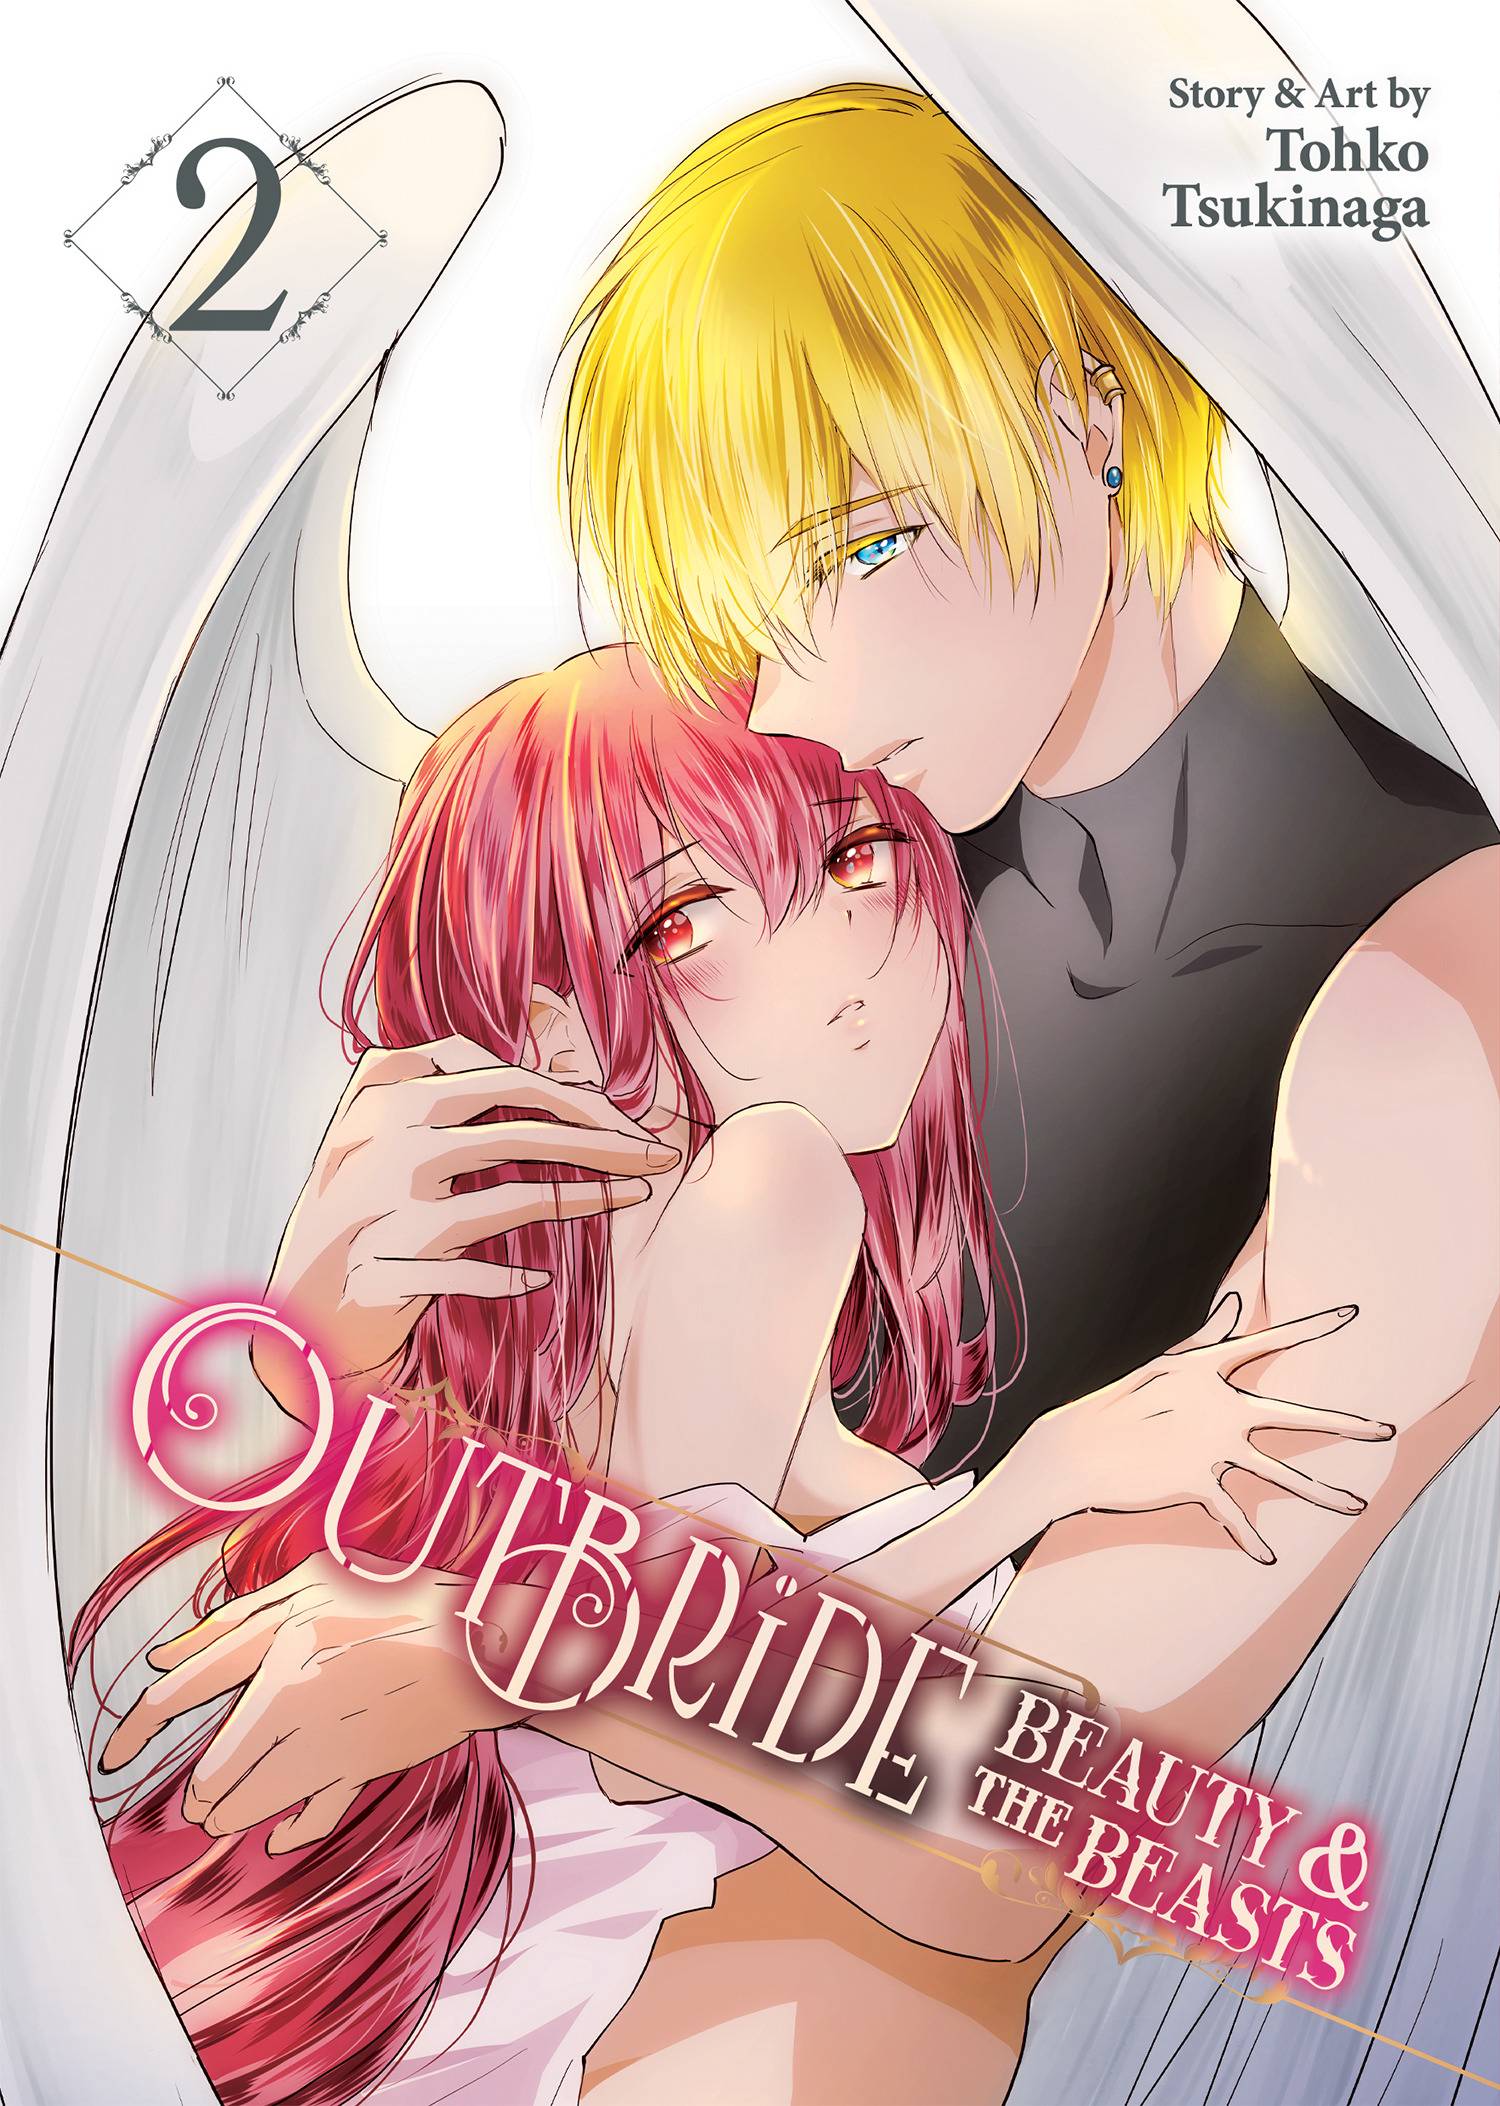 OUTBRIDE BEAUTY & BEASTS GN VOL 02